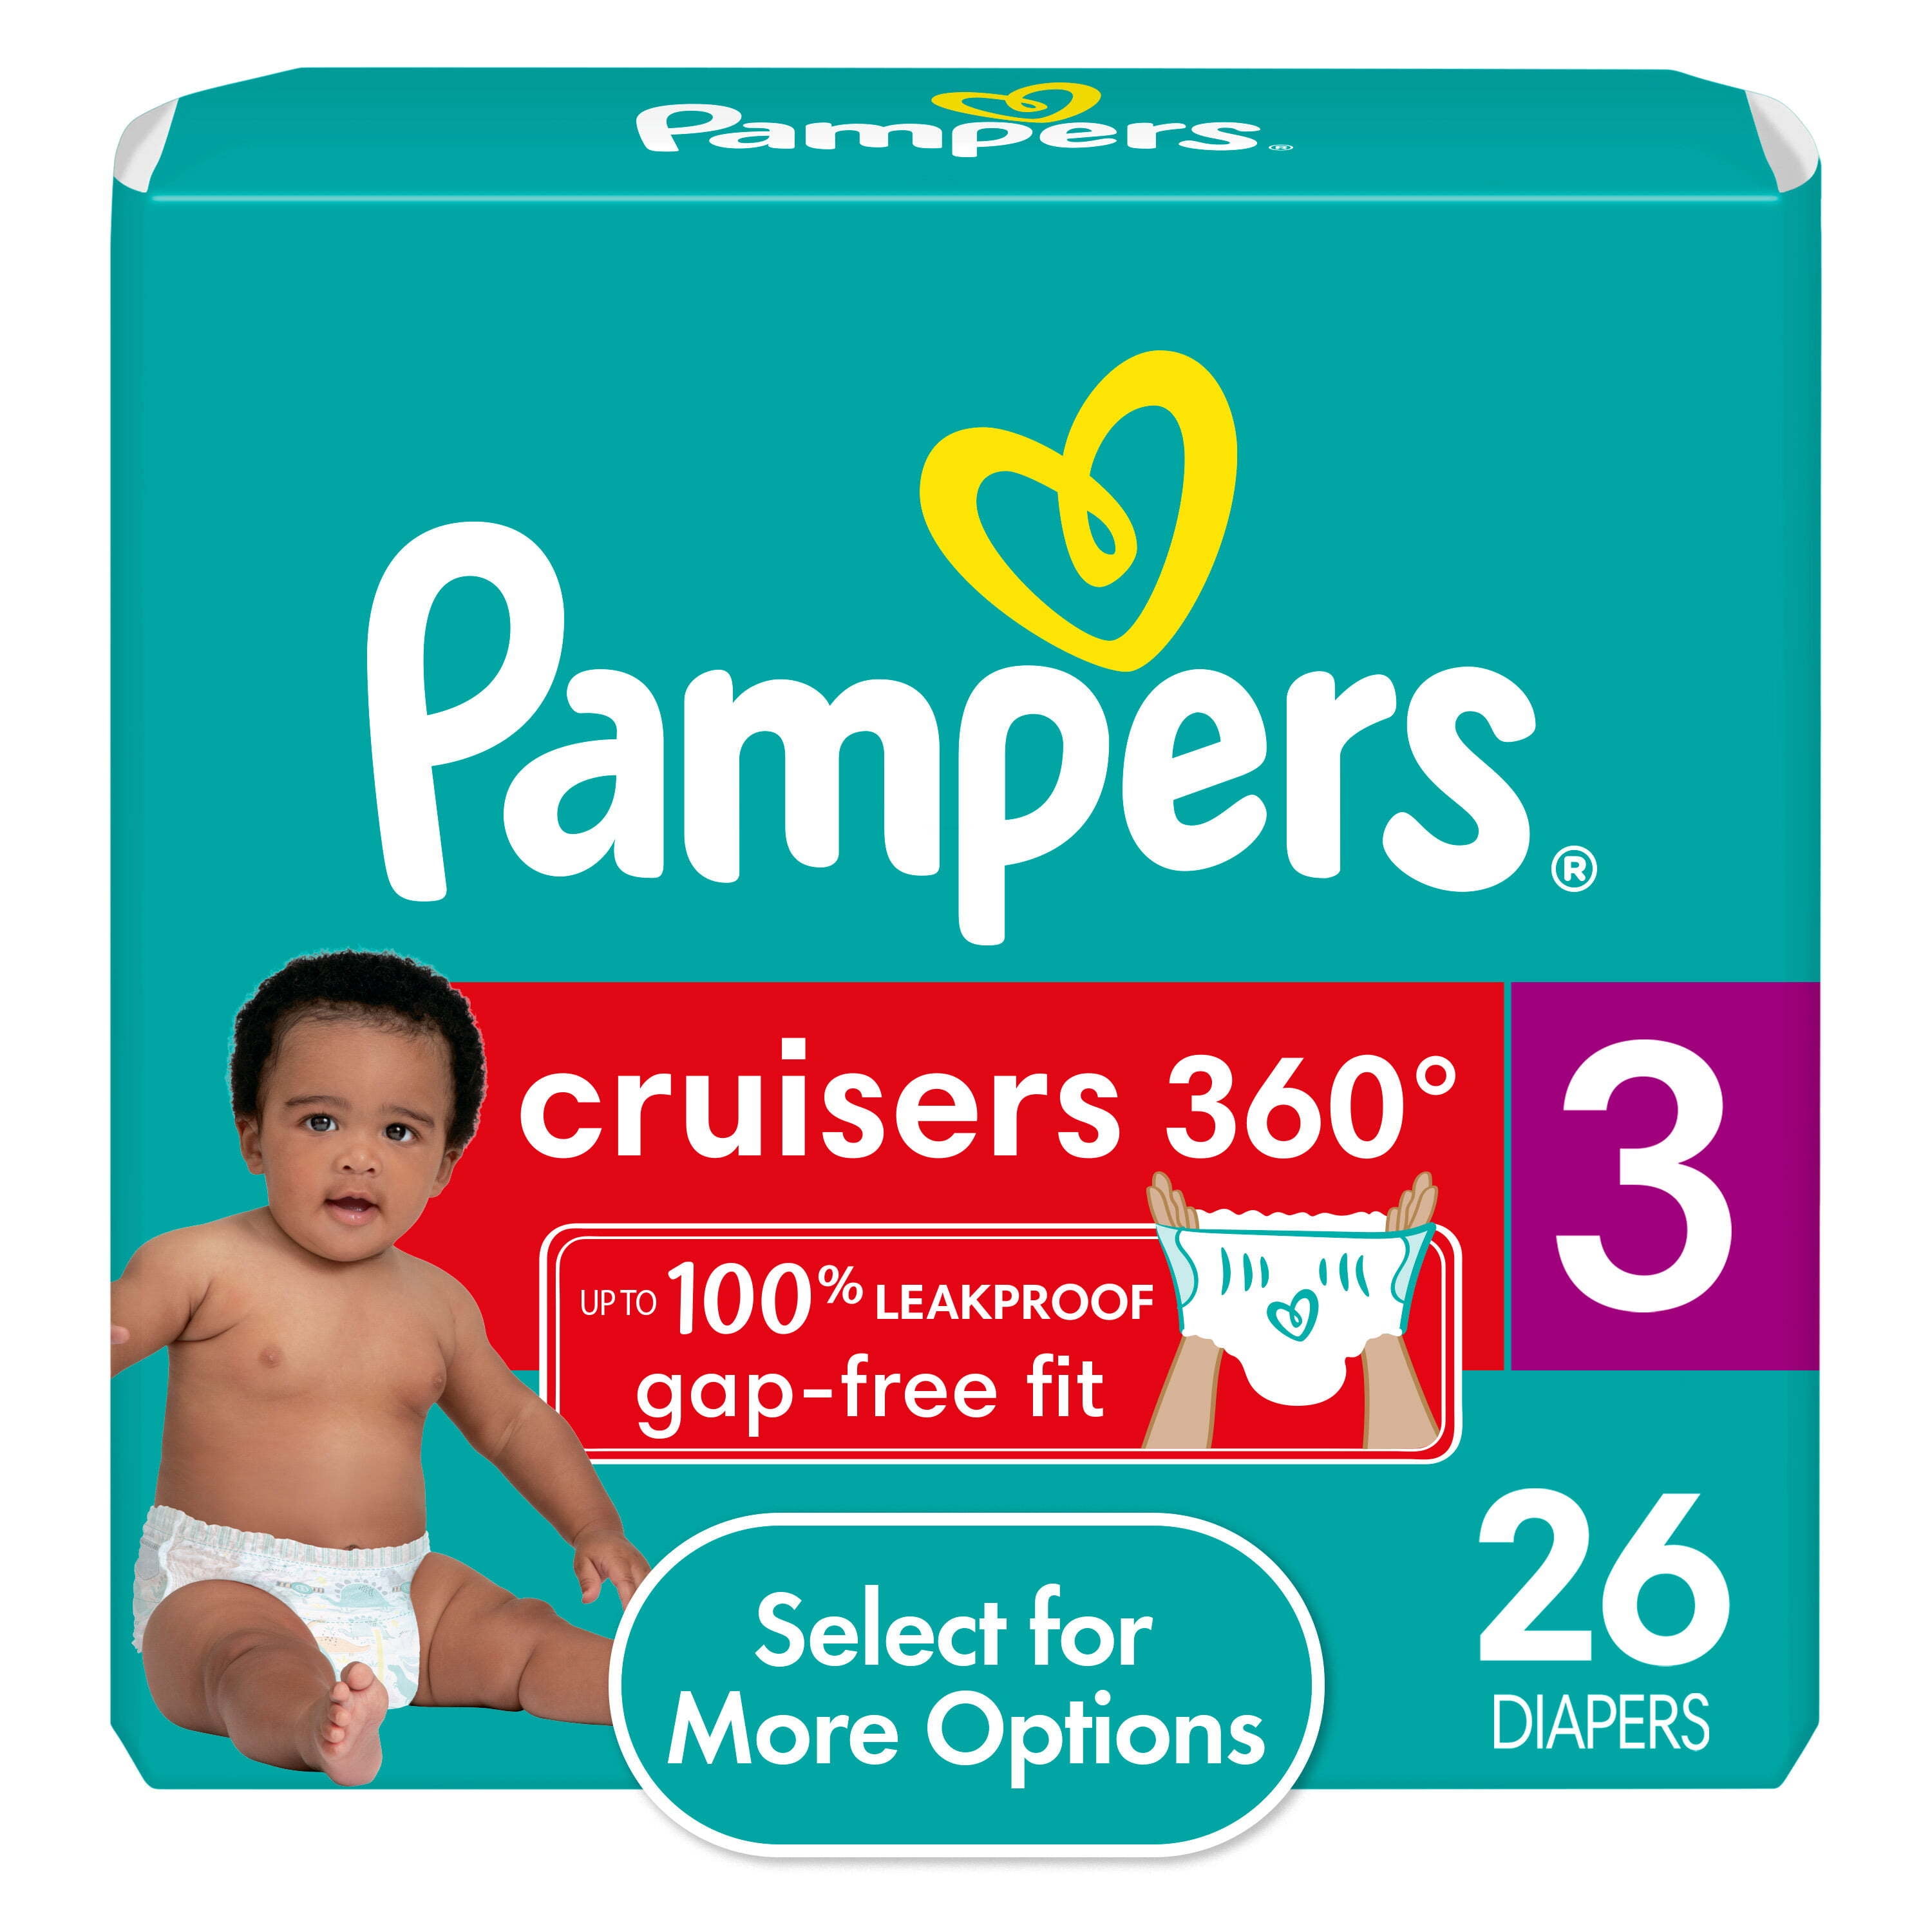 Pampers Baby Dry Taille 7 Extra Large 15+kg 50 Couches